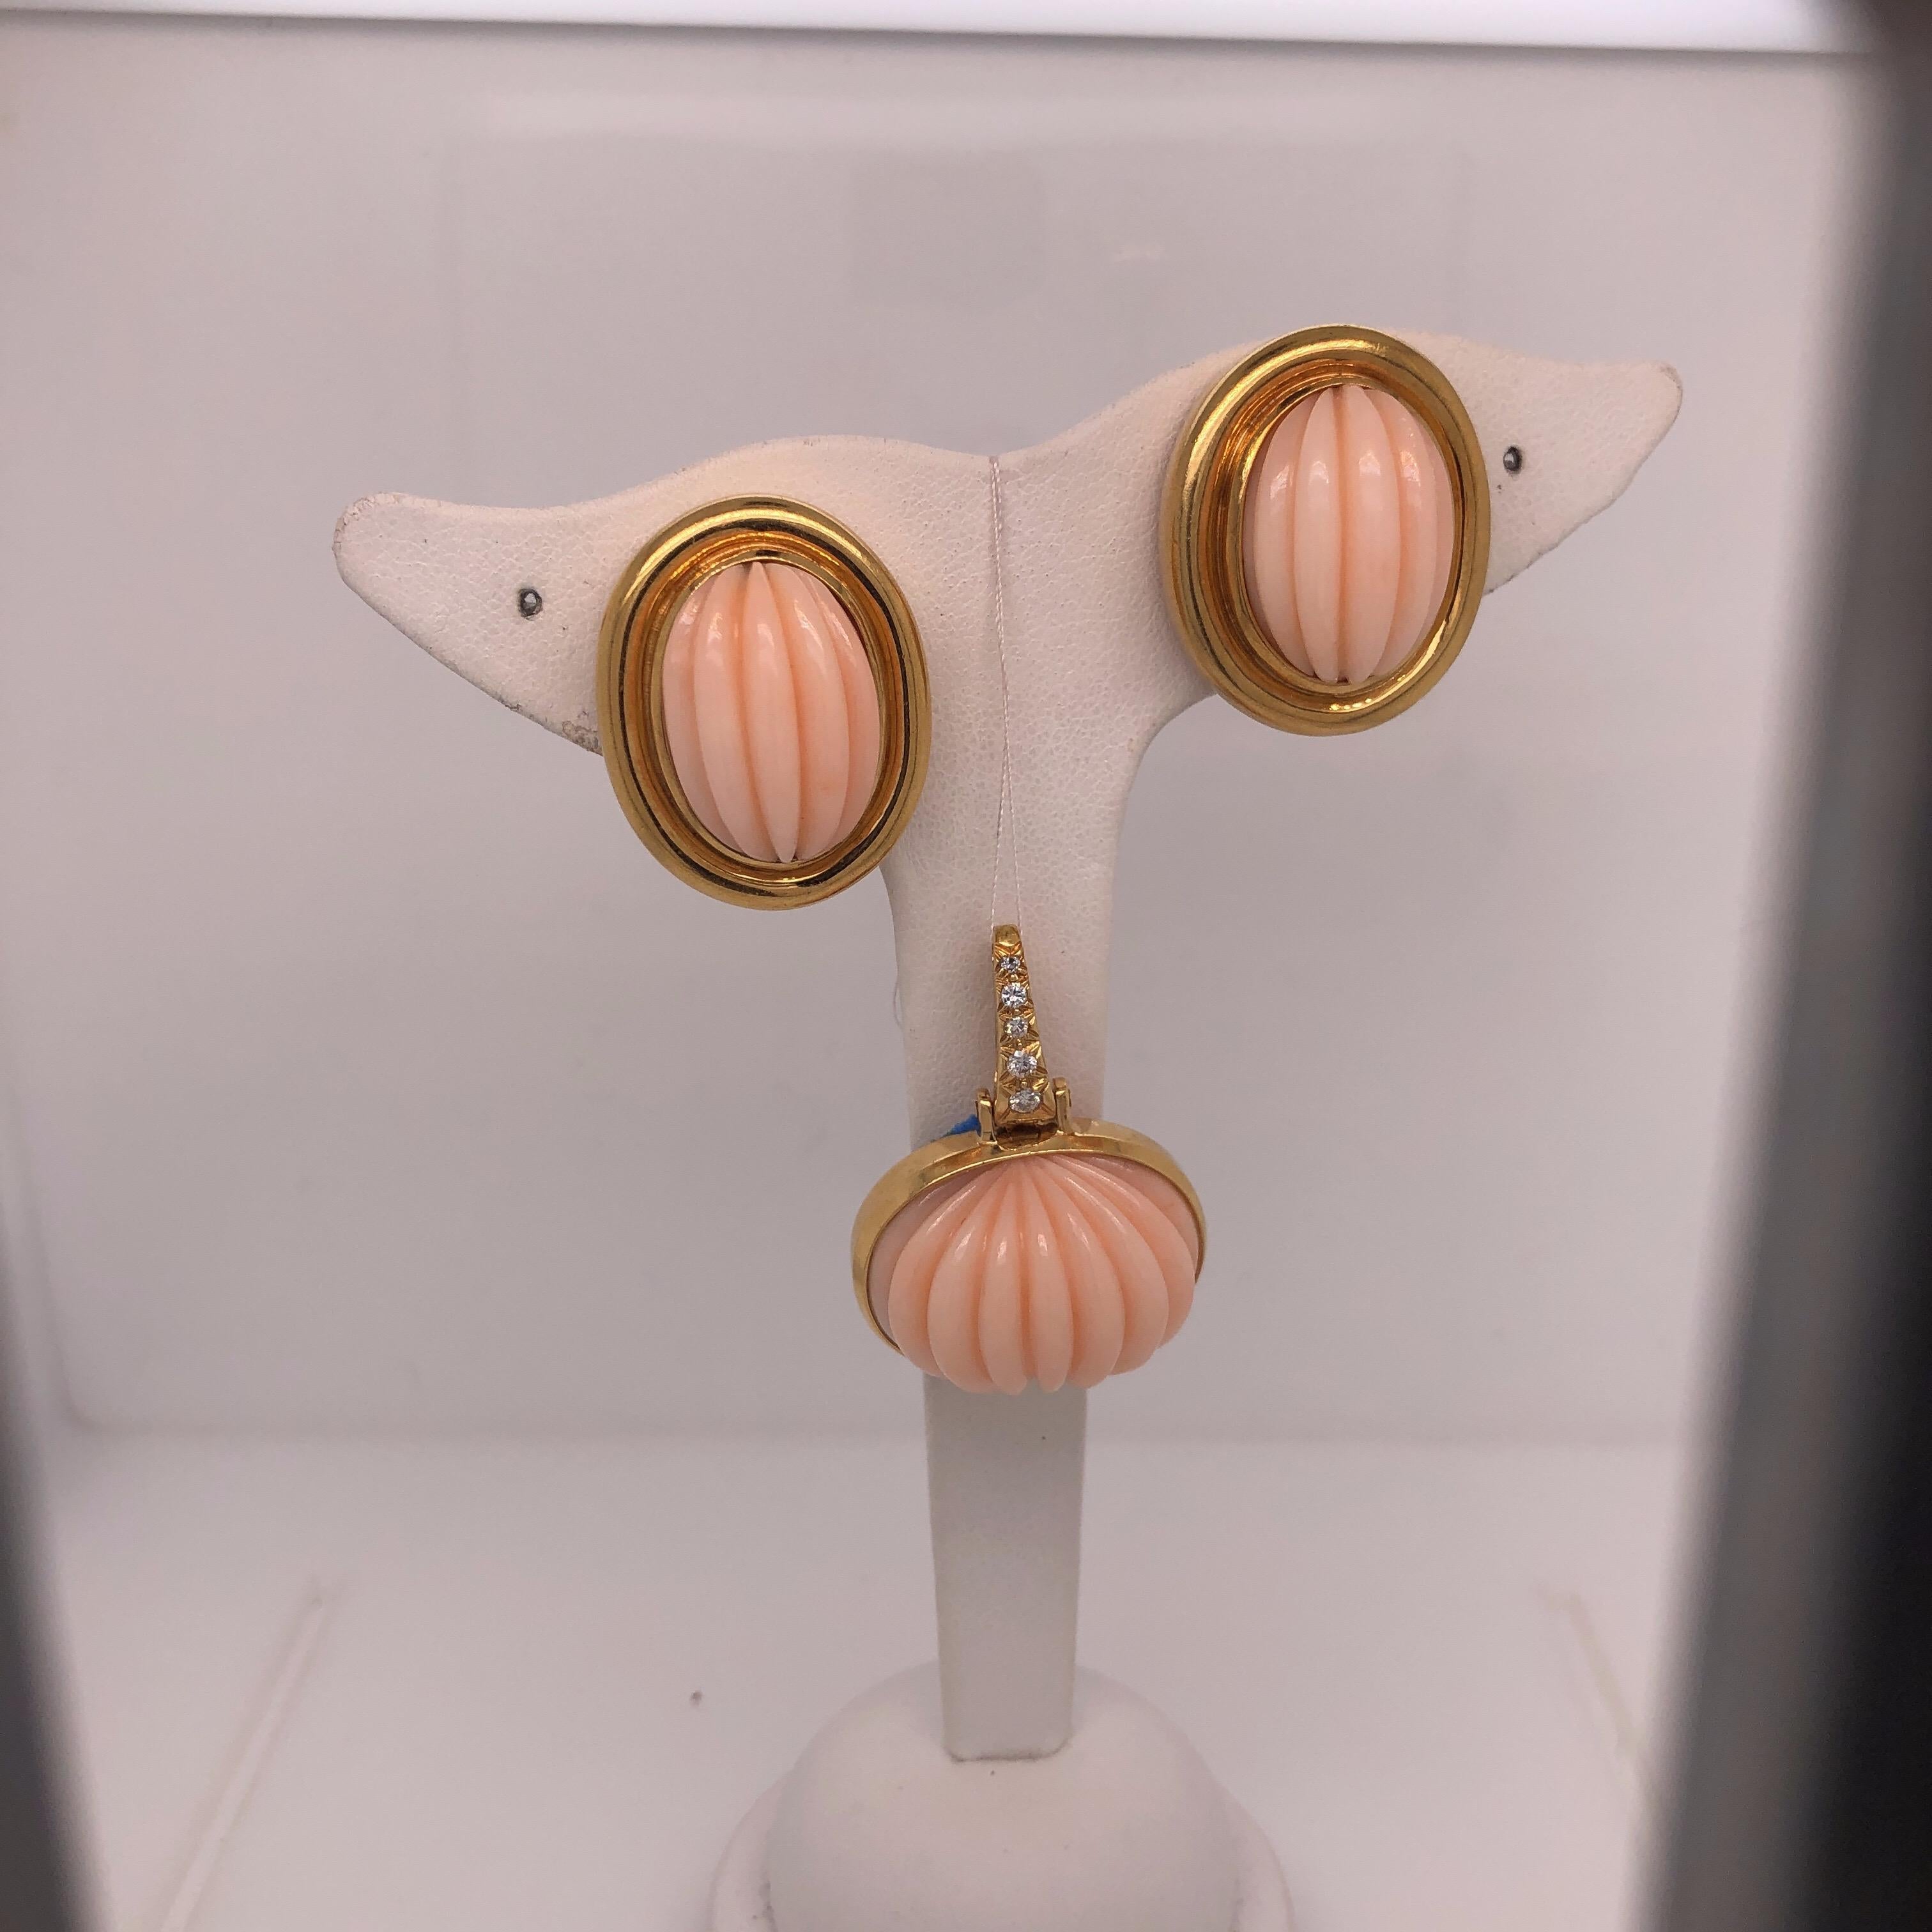 Beautiful Carved Coral Set from Acclaimed Designer Andrew Clunn who worked extensively with David Webb.  The set includes a pair of Carved Coral Earrings set in 18K Yellow Gold.  All pieces stamped A Clunn and 18K.  The pendant features a matching